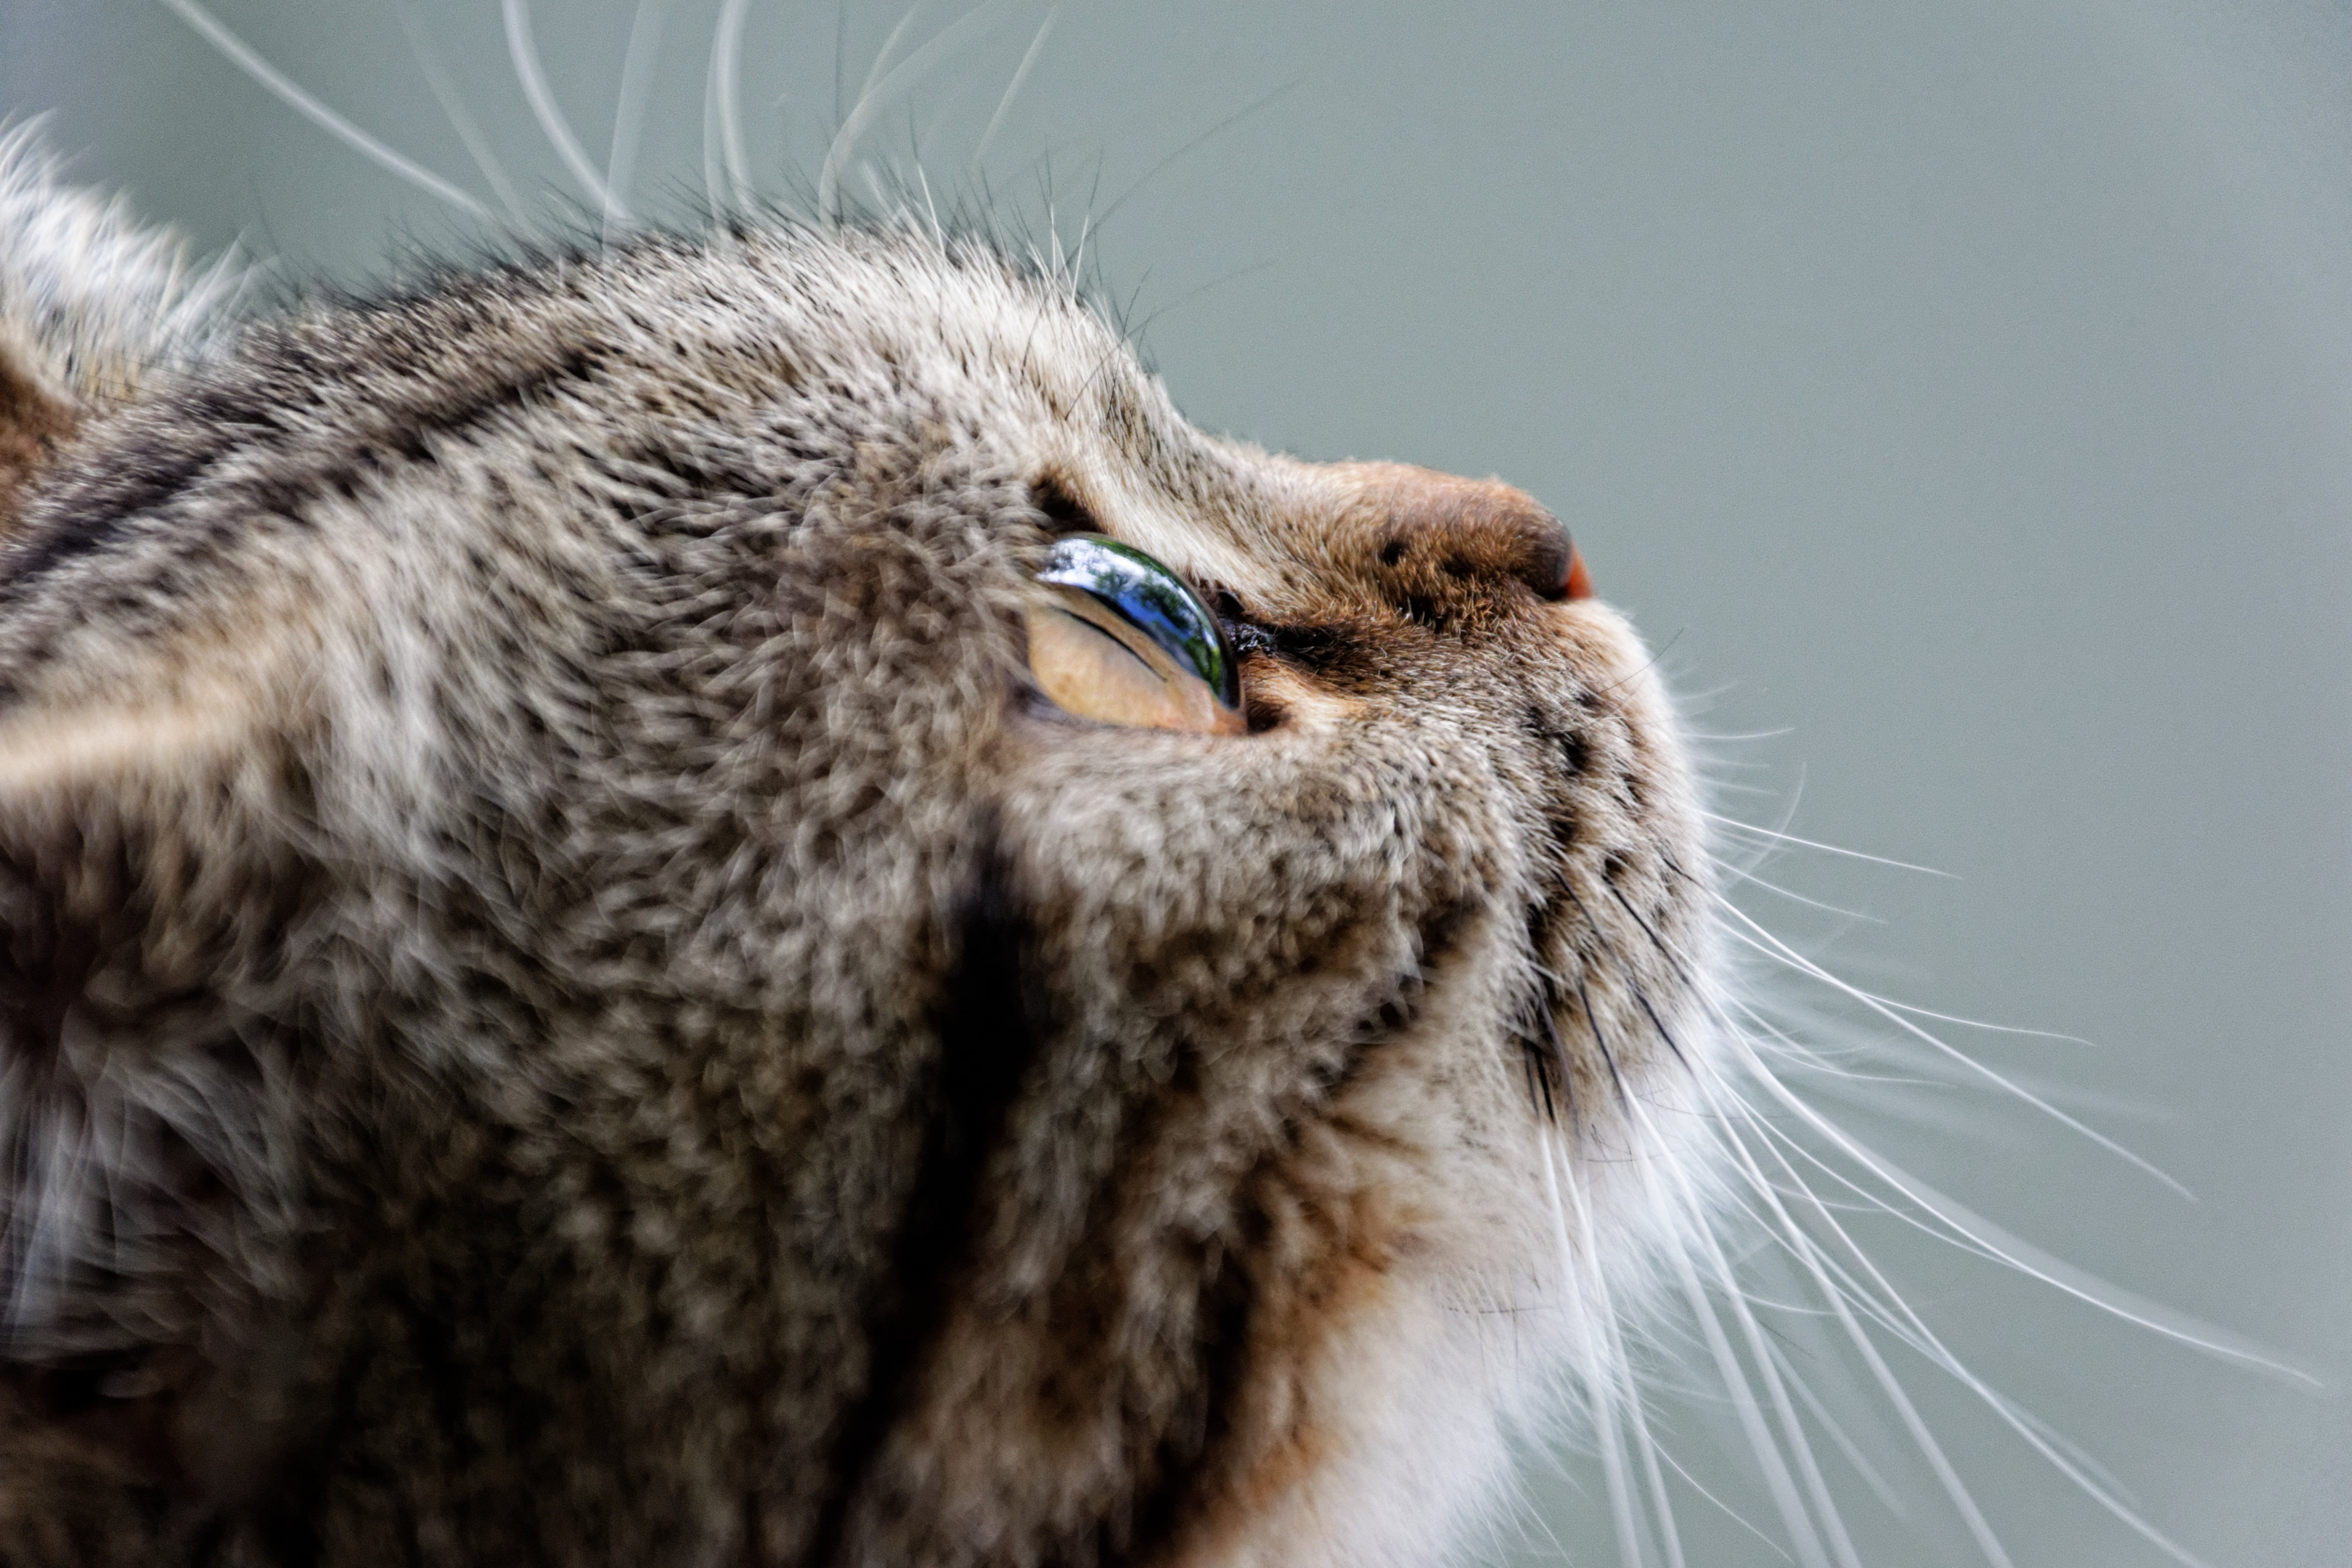 Males are also prone to breast cancer in cats.